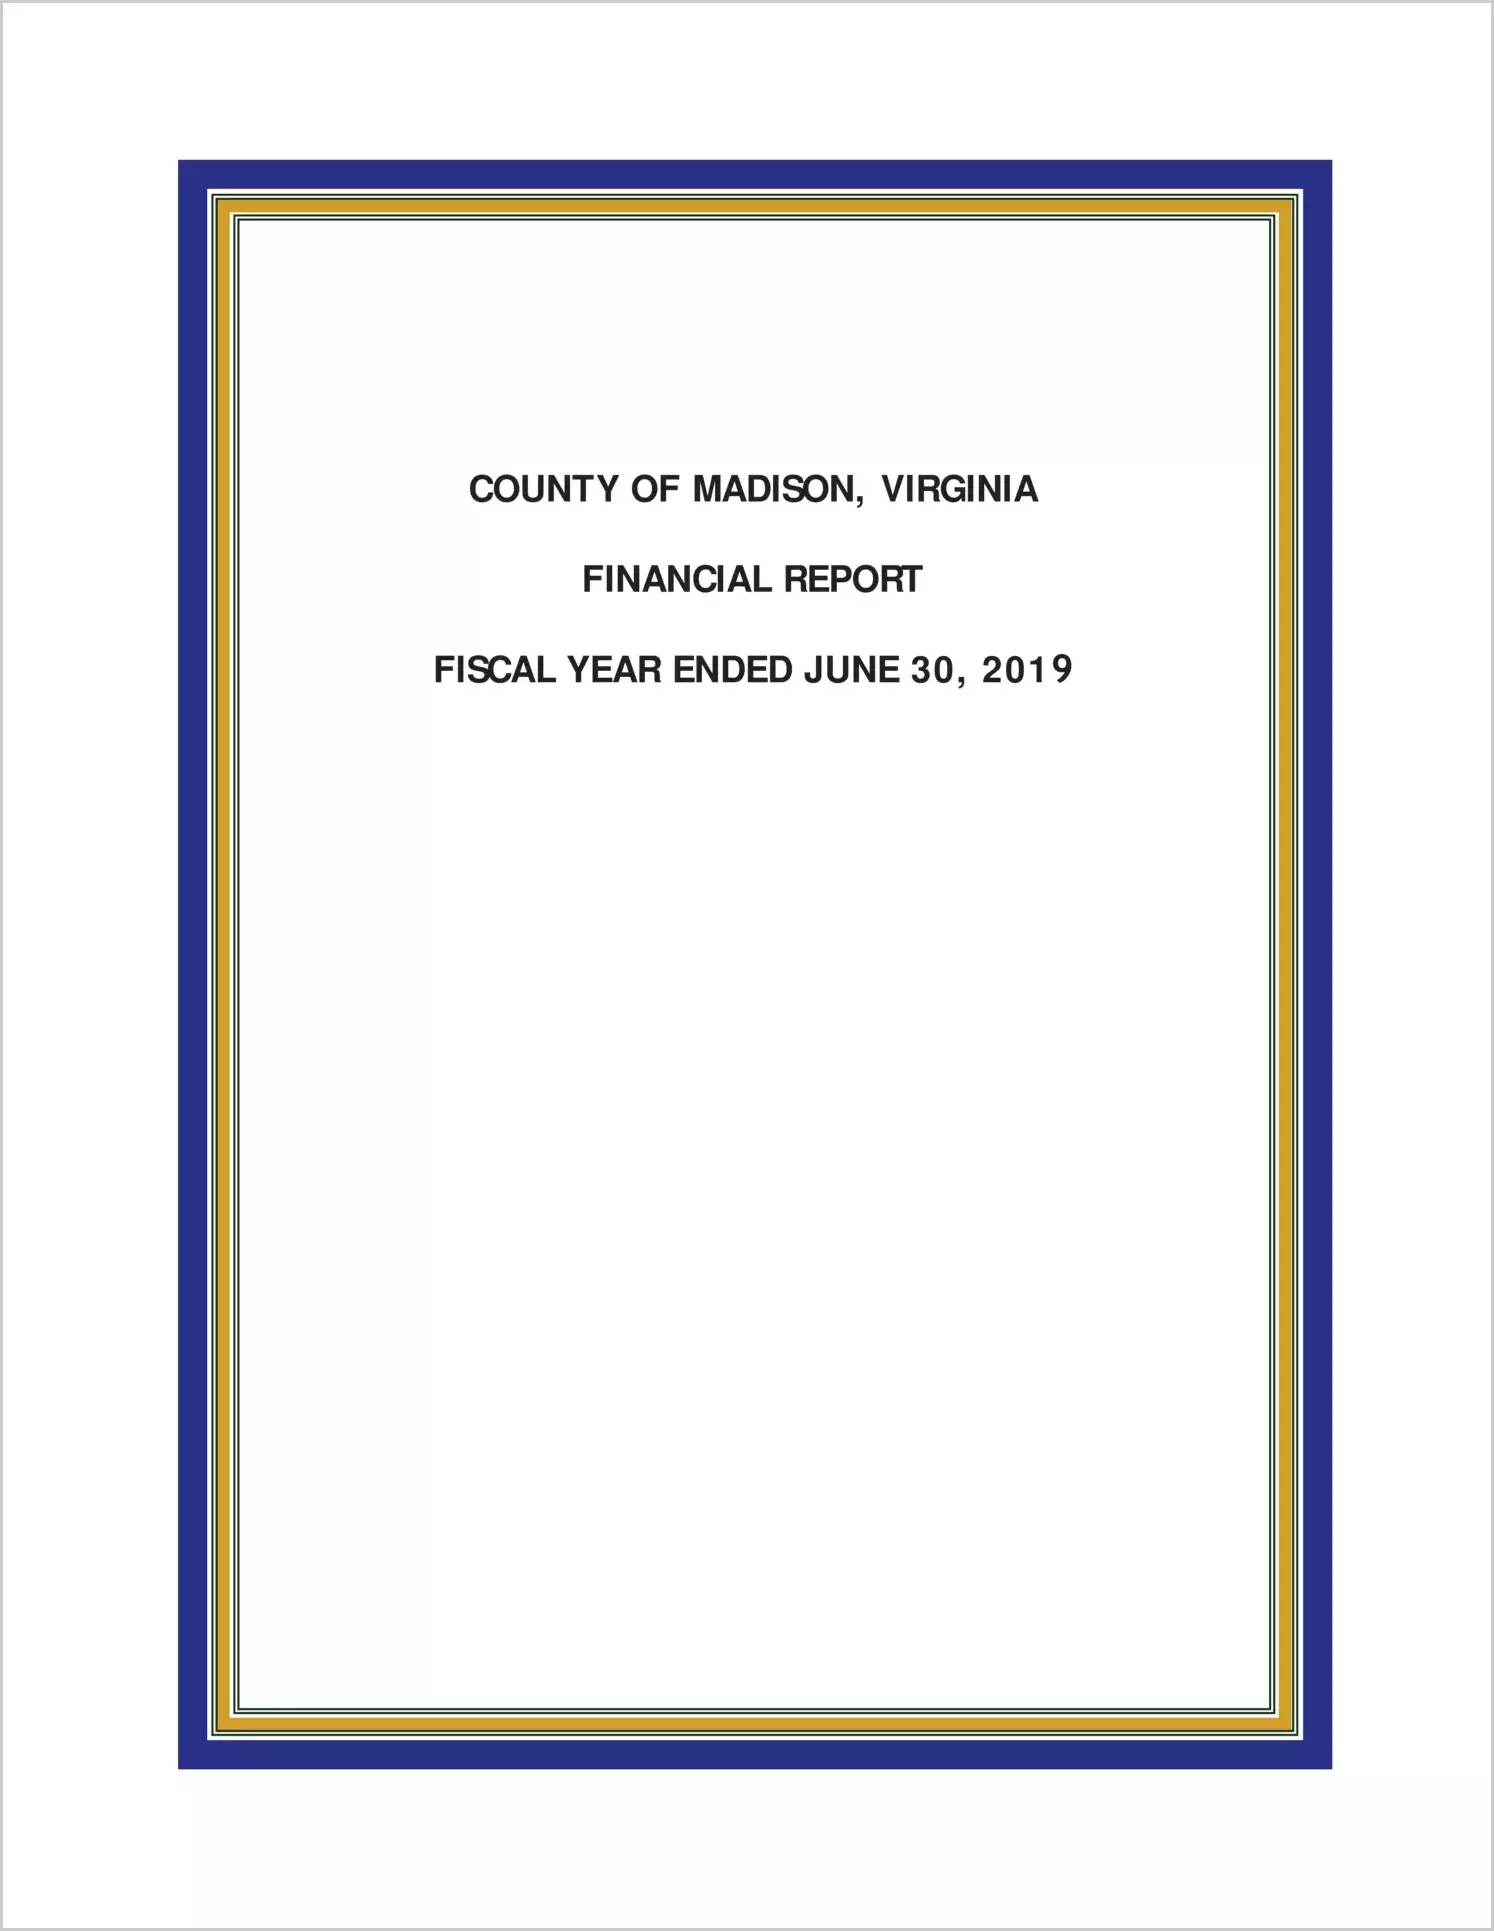 2019 Annual Financial Report for County of Madison